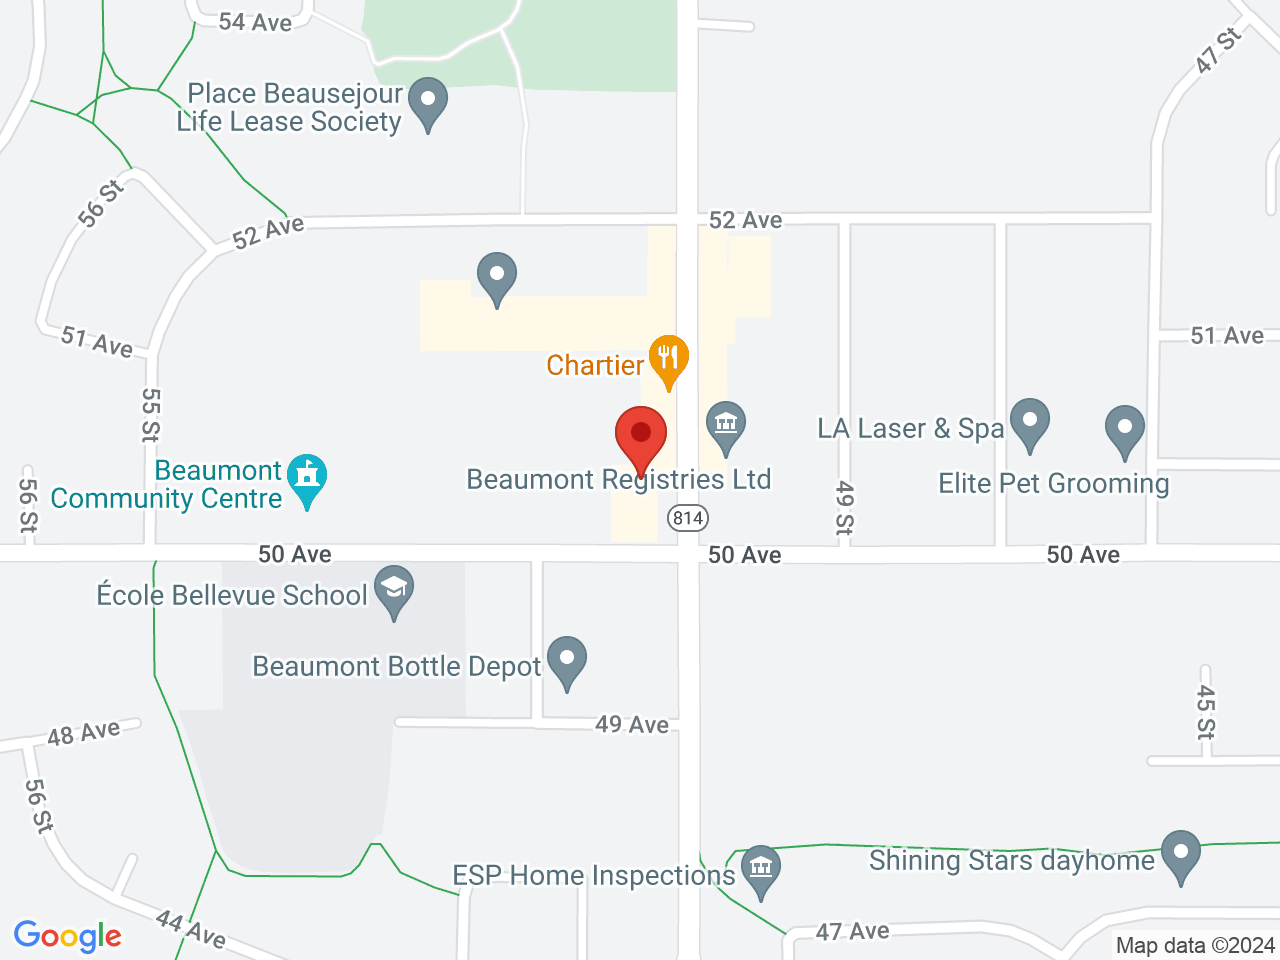 Street map for Spiritleaf Beaumont, 5008 50 St., Beaumont AB